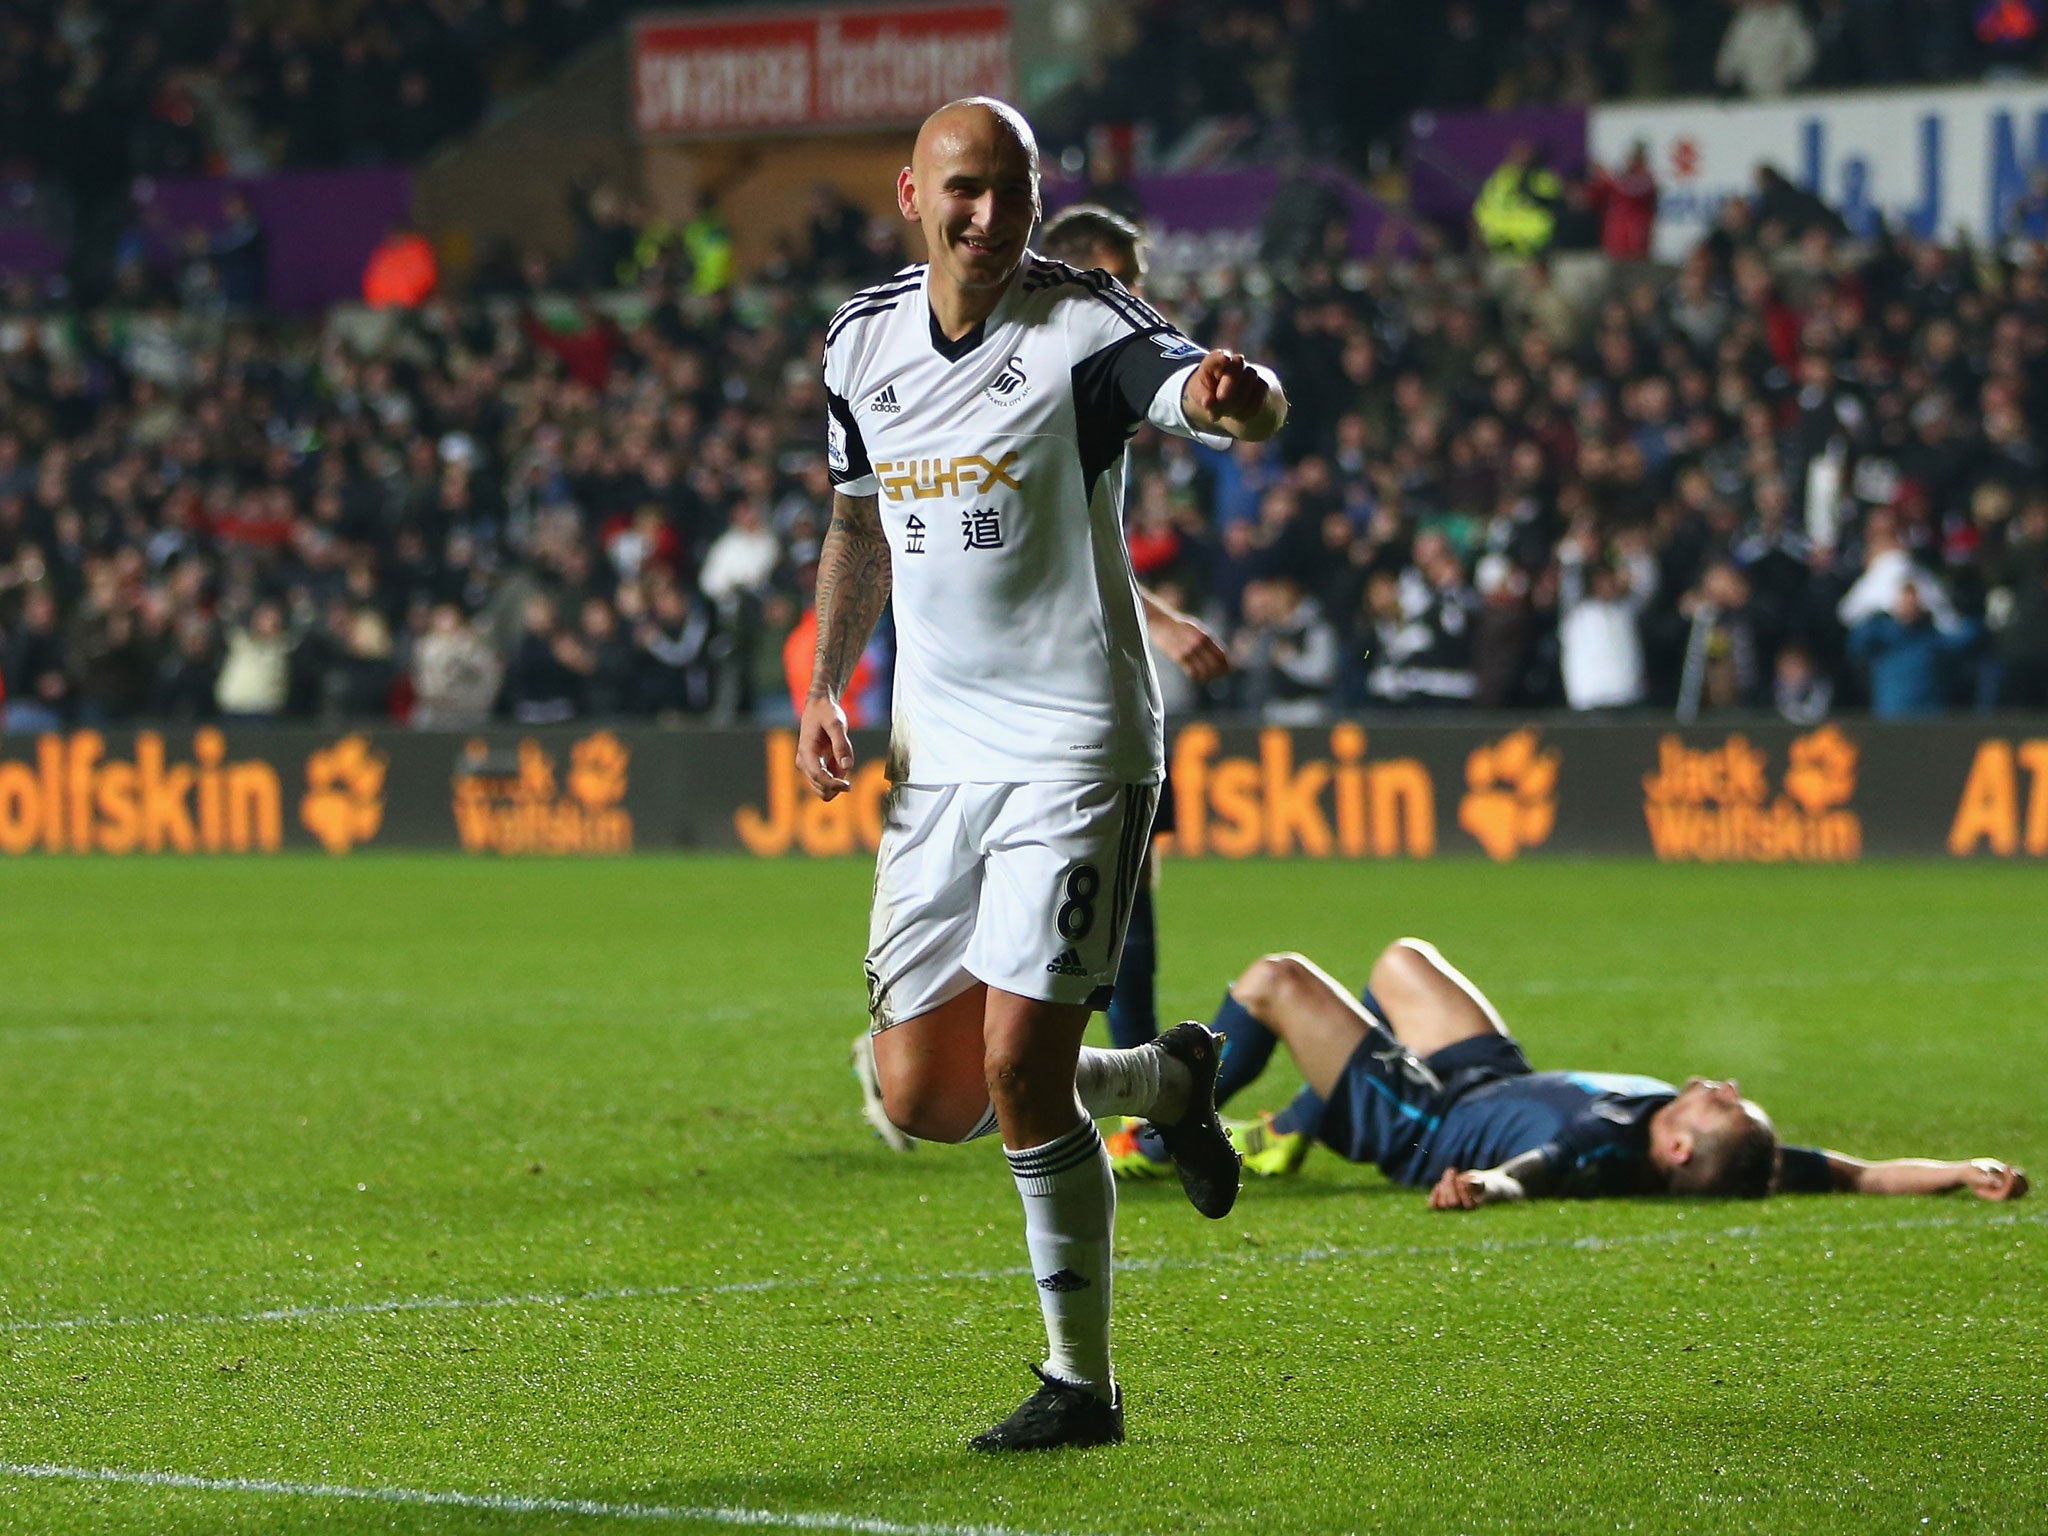 Swansea midfielder Jonjo Shelvey has been tipped for a bright England future by his club assistant coach Morten Wieghorst